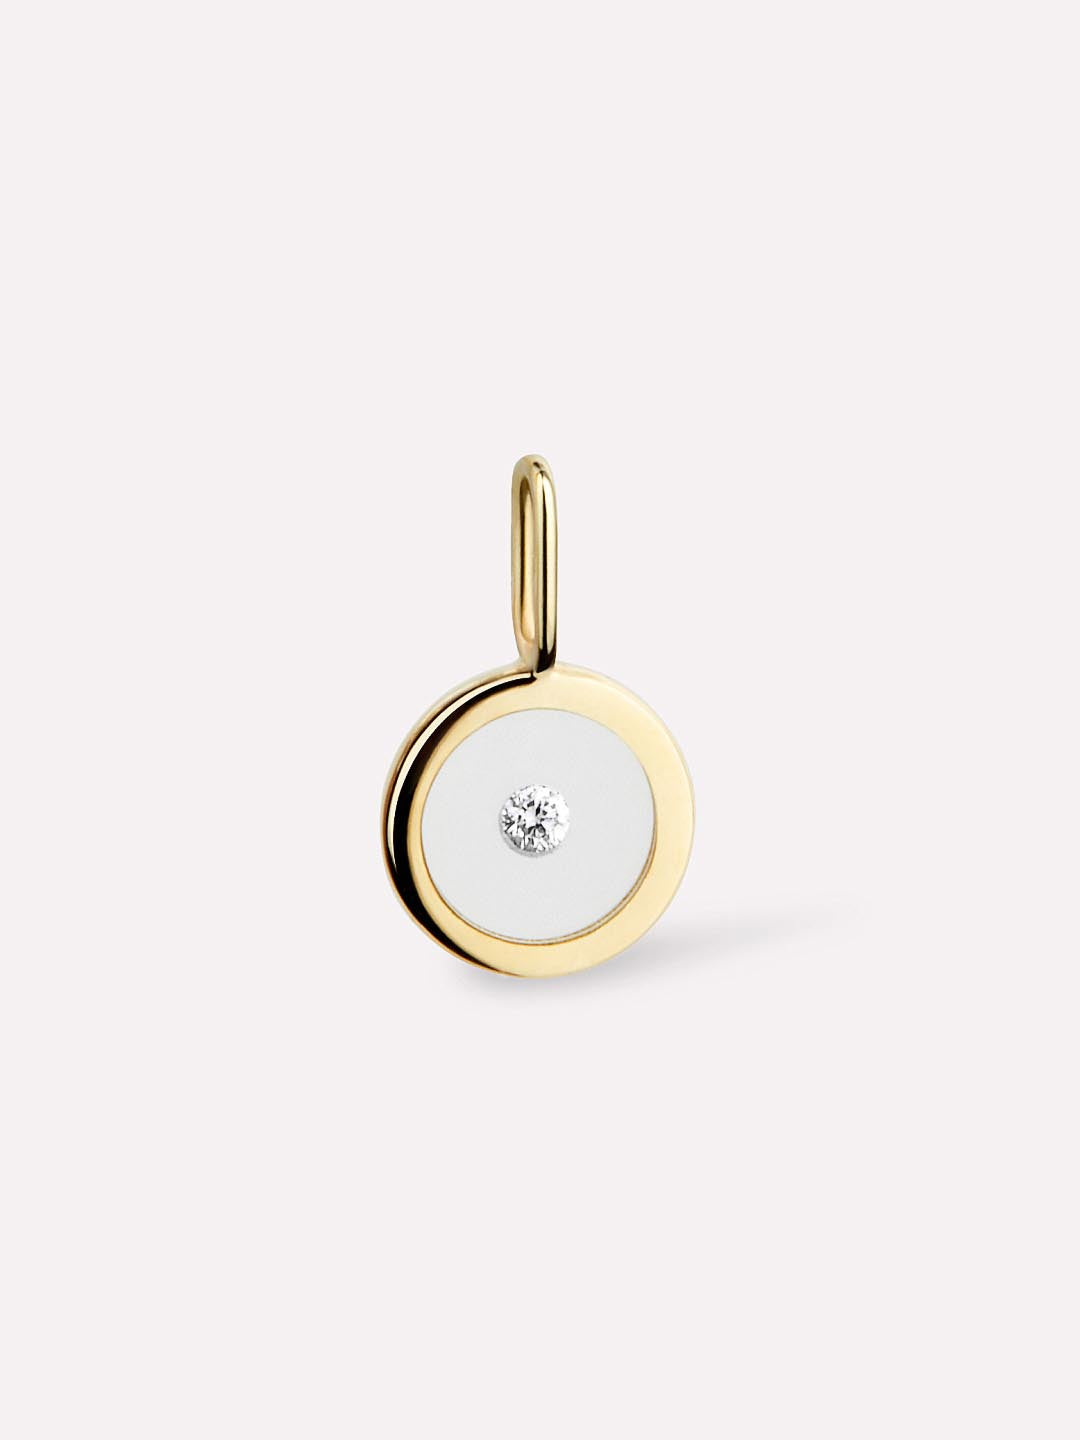 Gold Pendant - Gold Letter Charm | Ana Luisa Jewelry